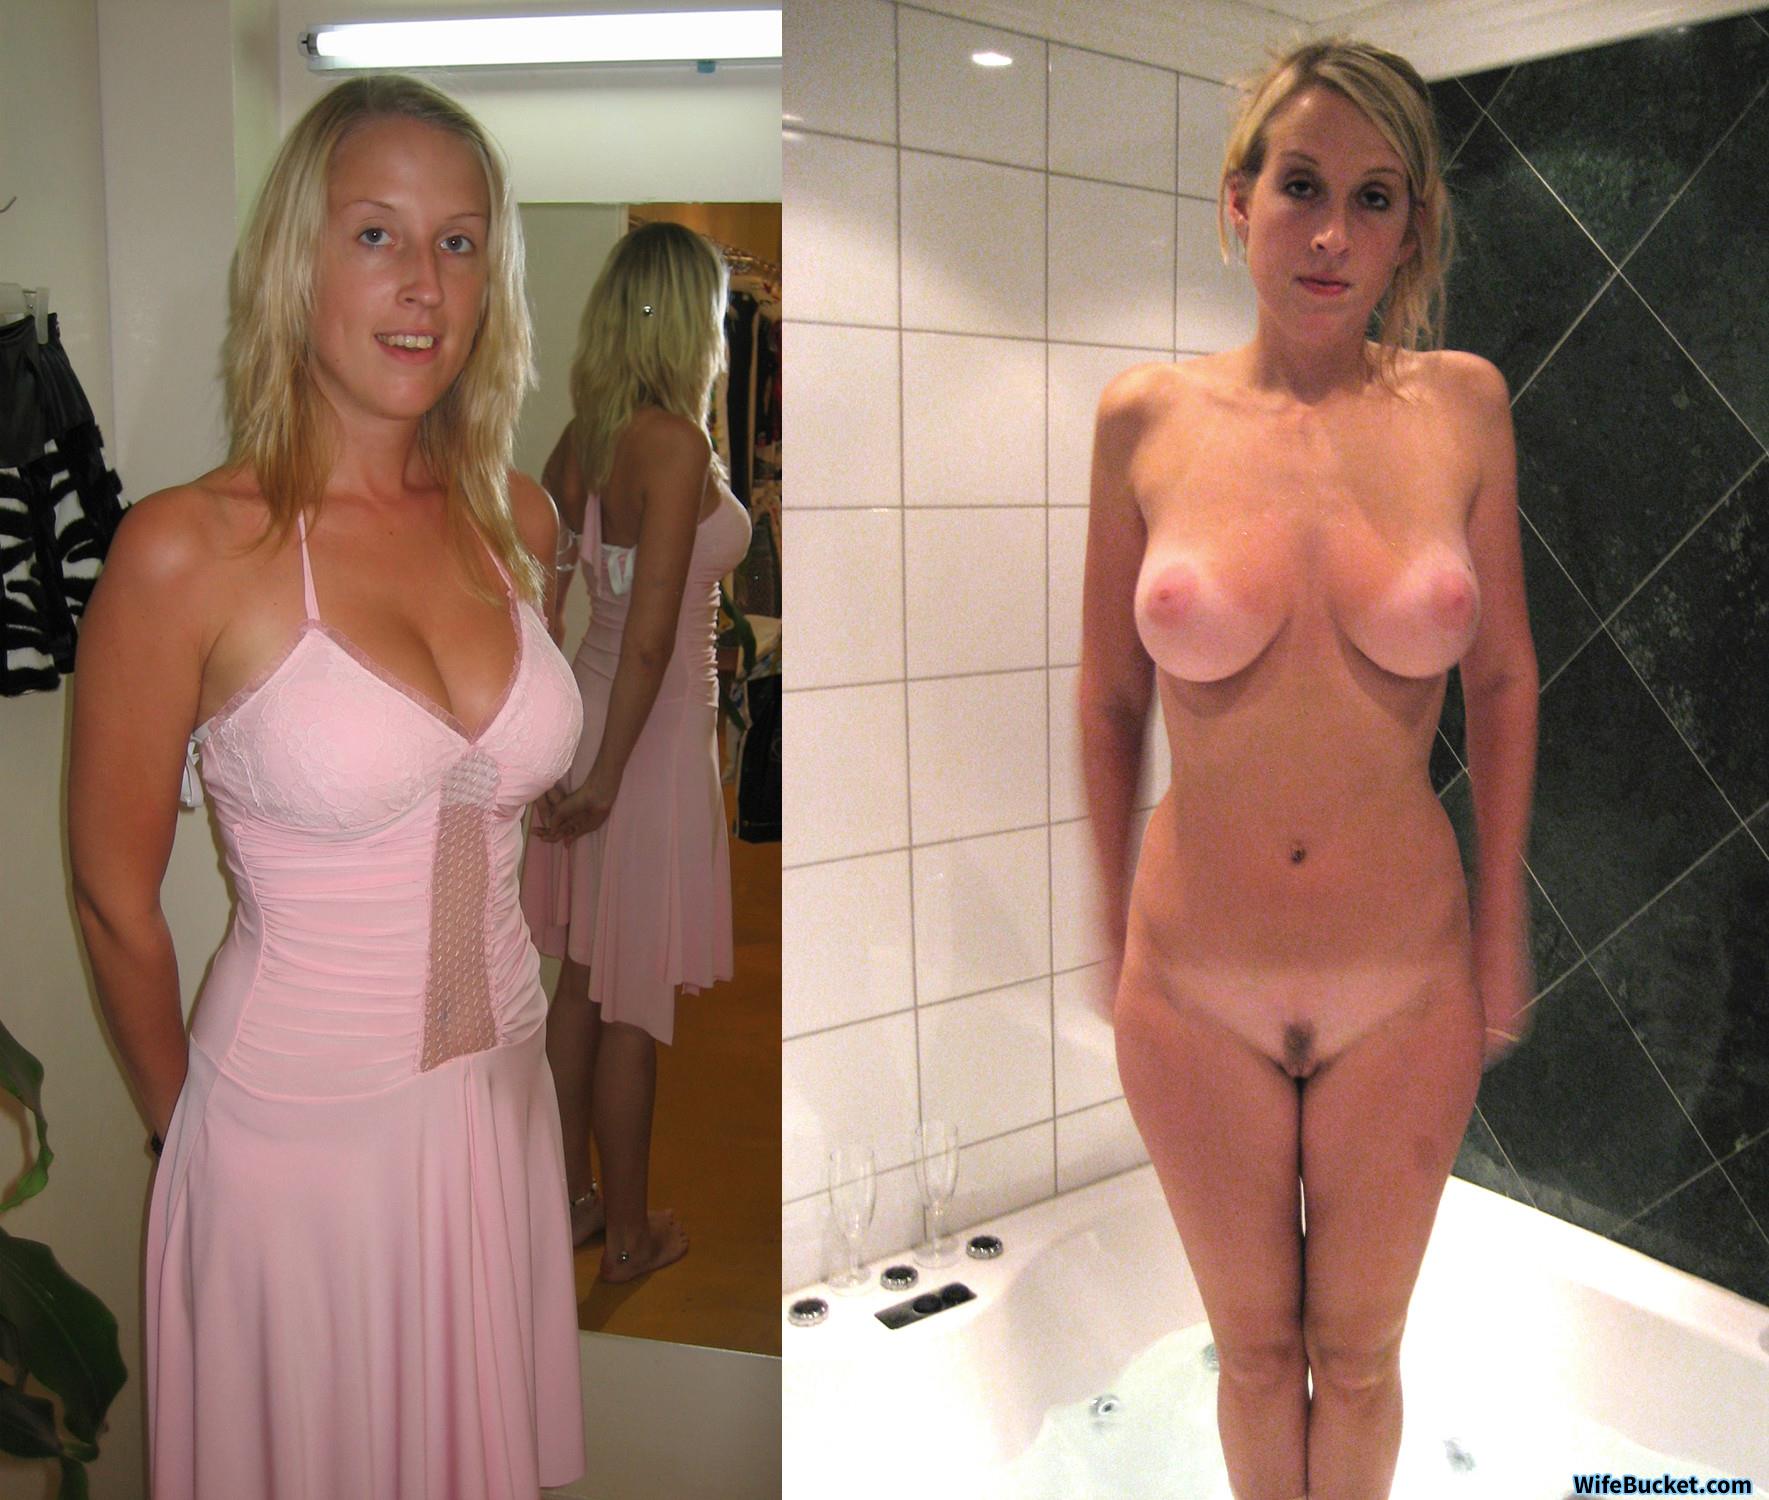 Dressed and then undressed Hot wives in before-after nudes!